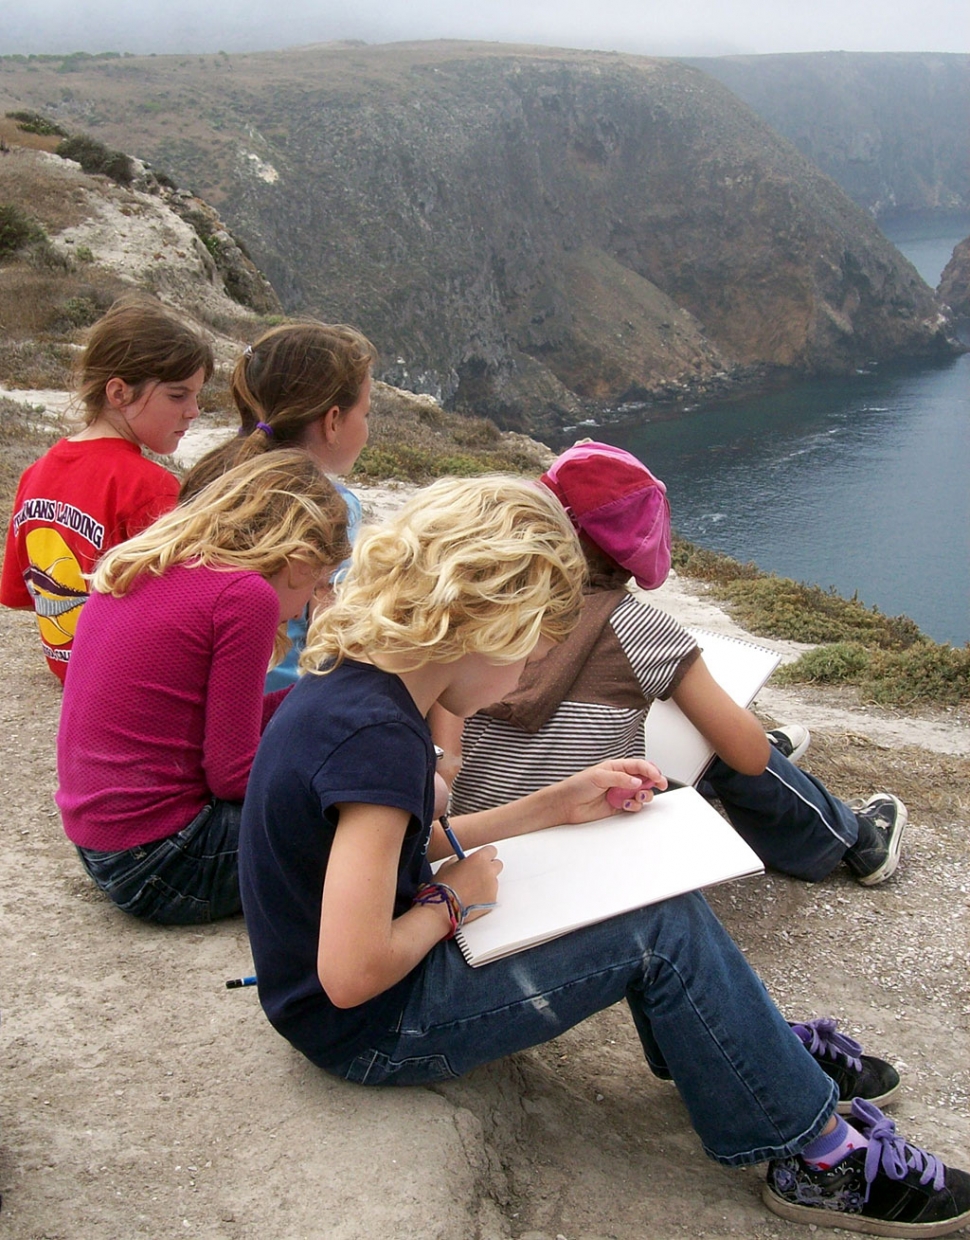 Sketching at Inspiration Point.
